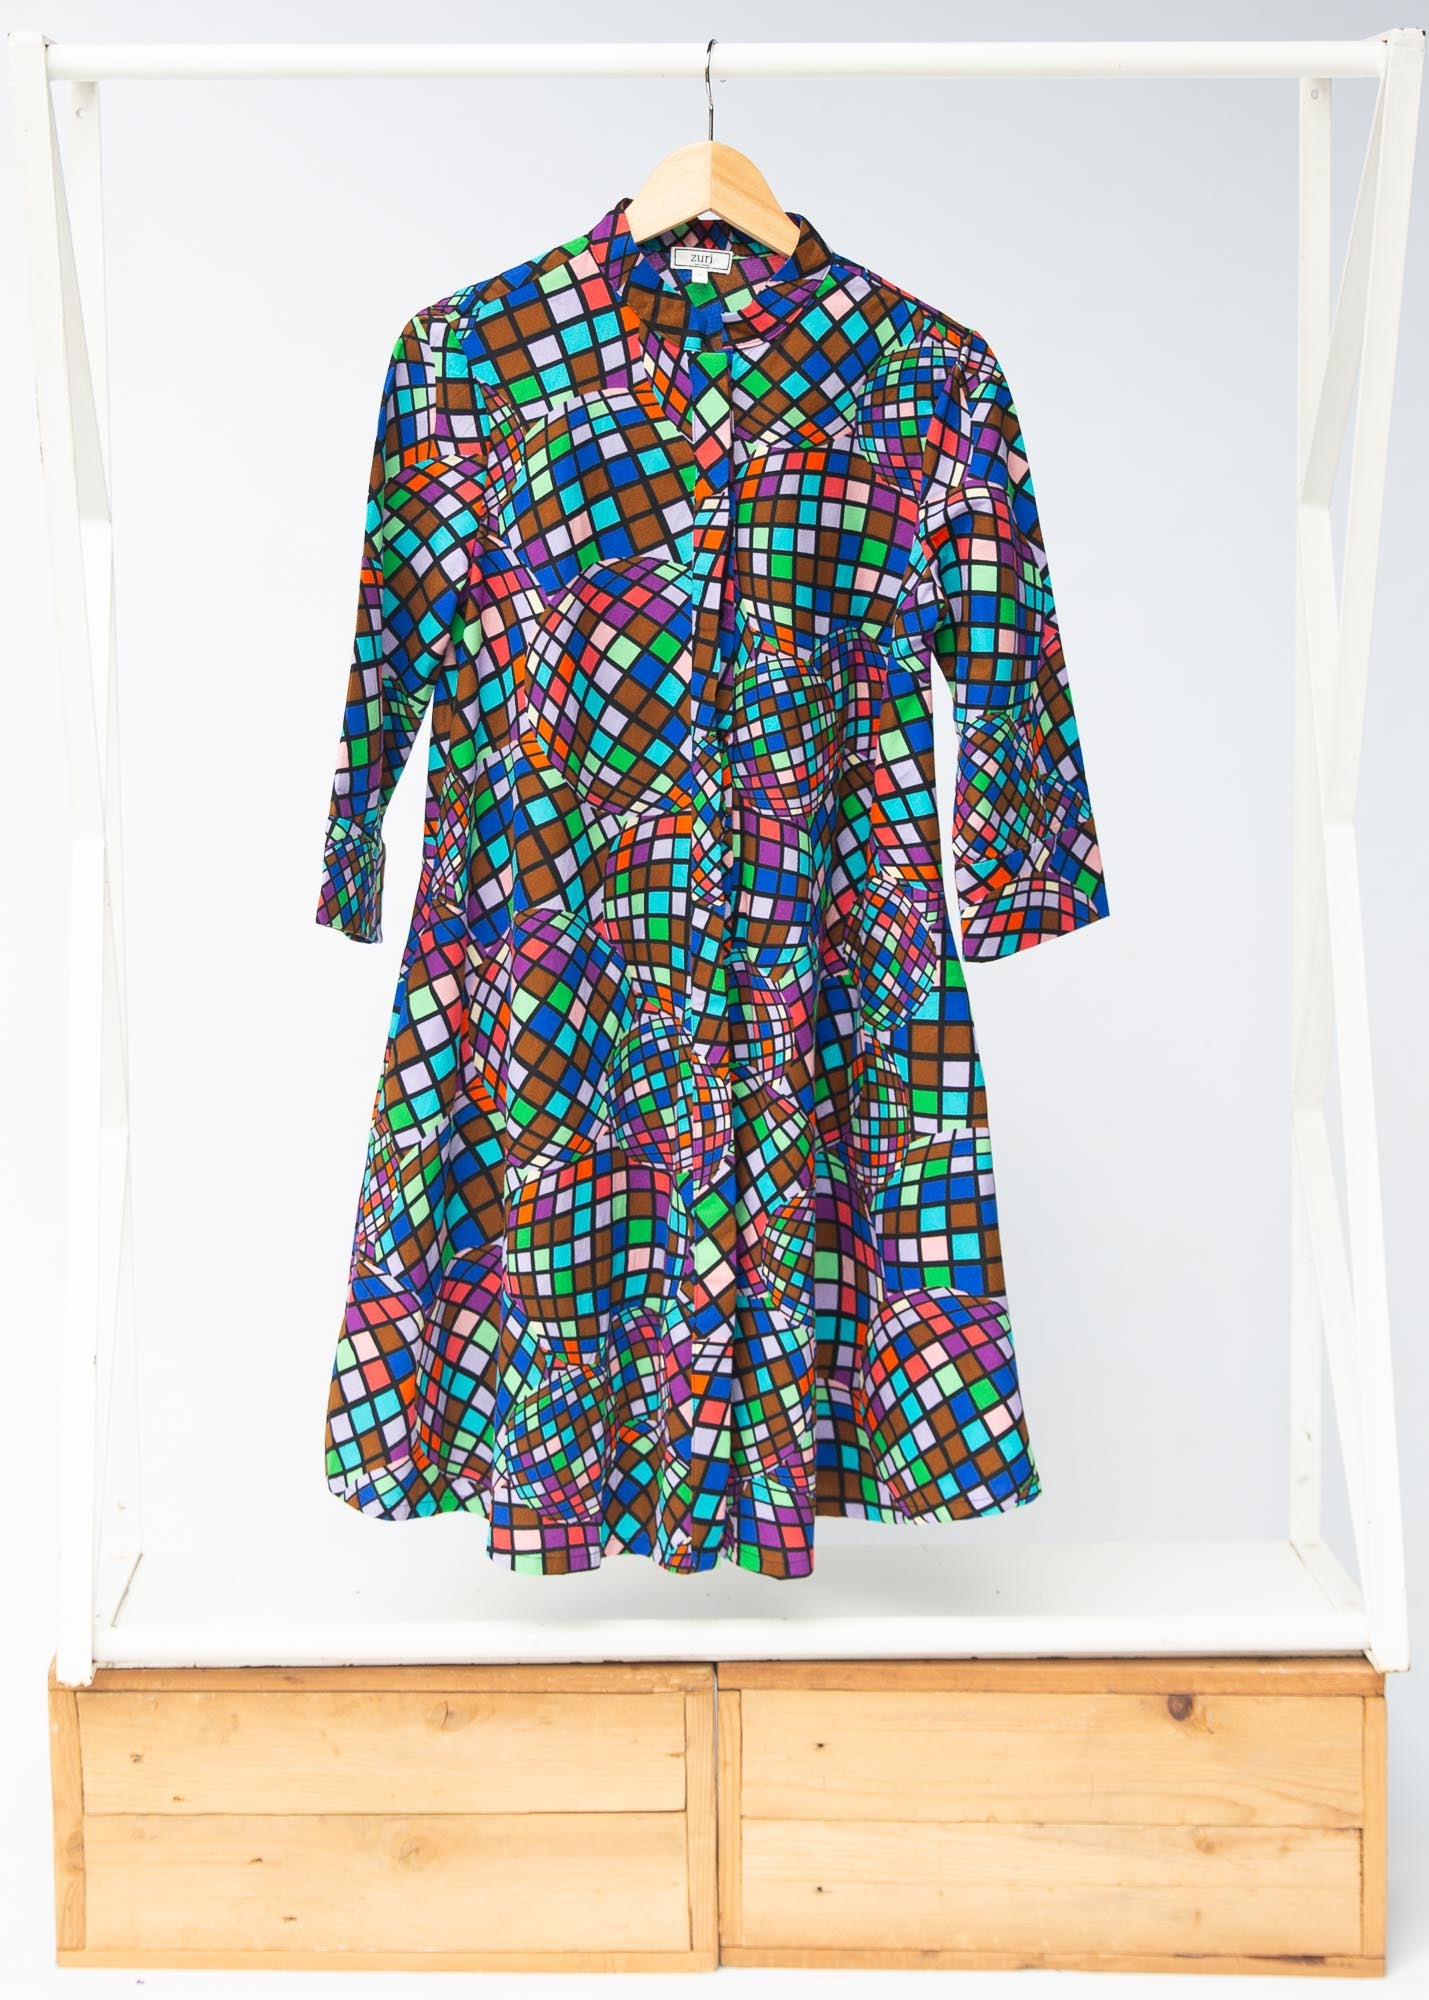 Display of multi colored dress with disco ball print